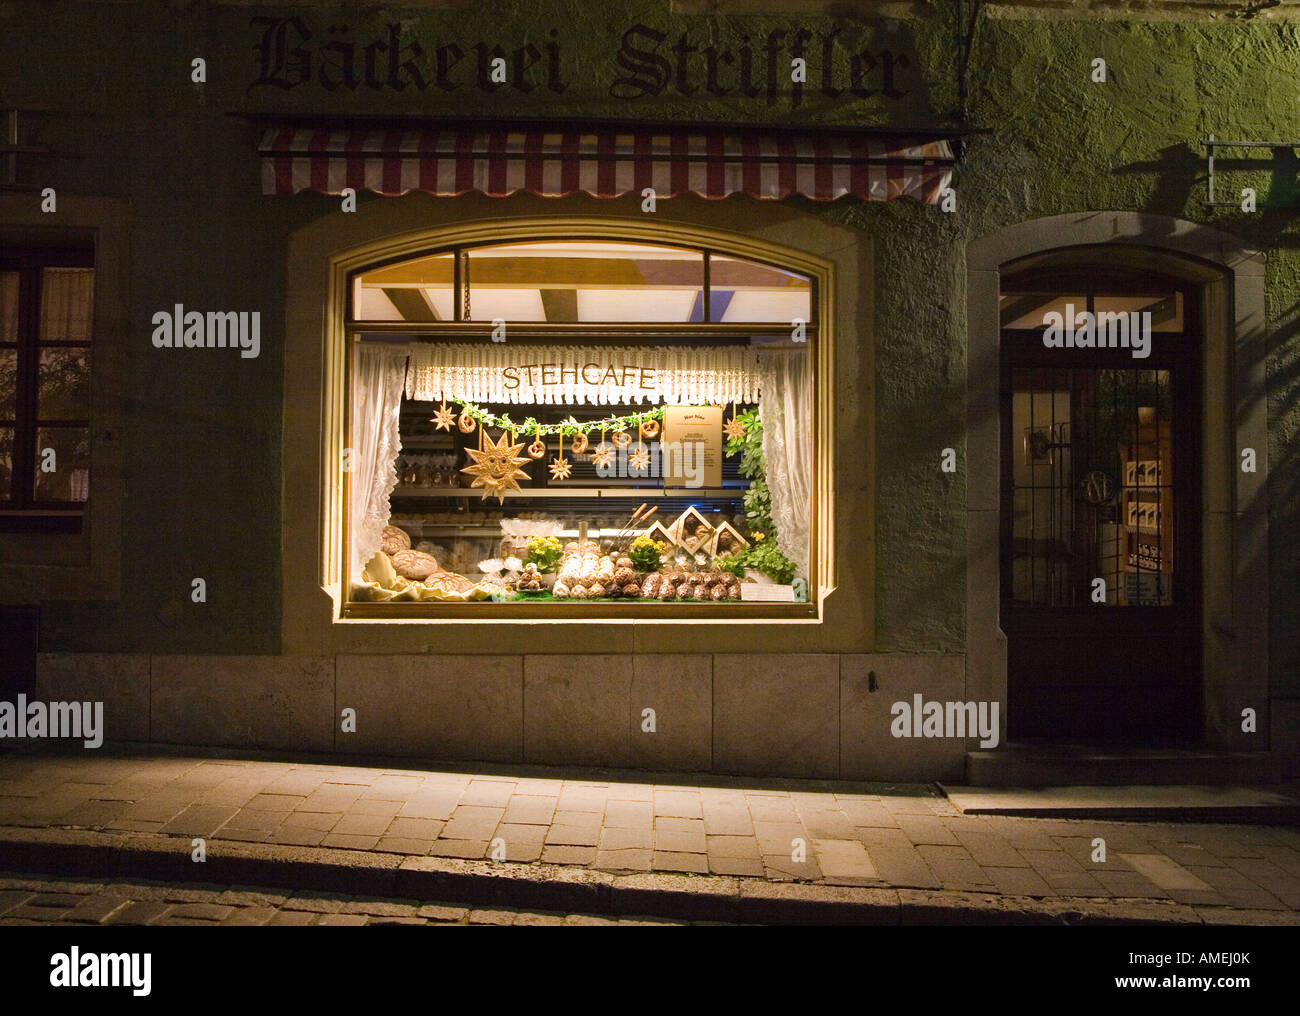 Cafe shop window display with speciality bread at night Rothenburg ob der Tauber Germany Stock Photo